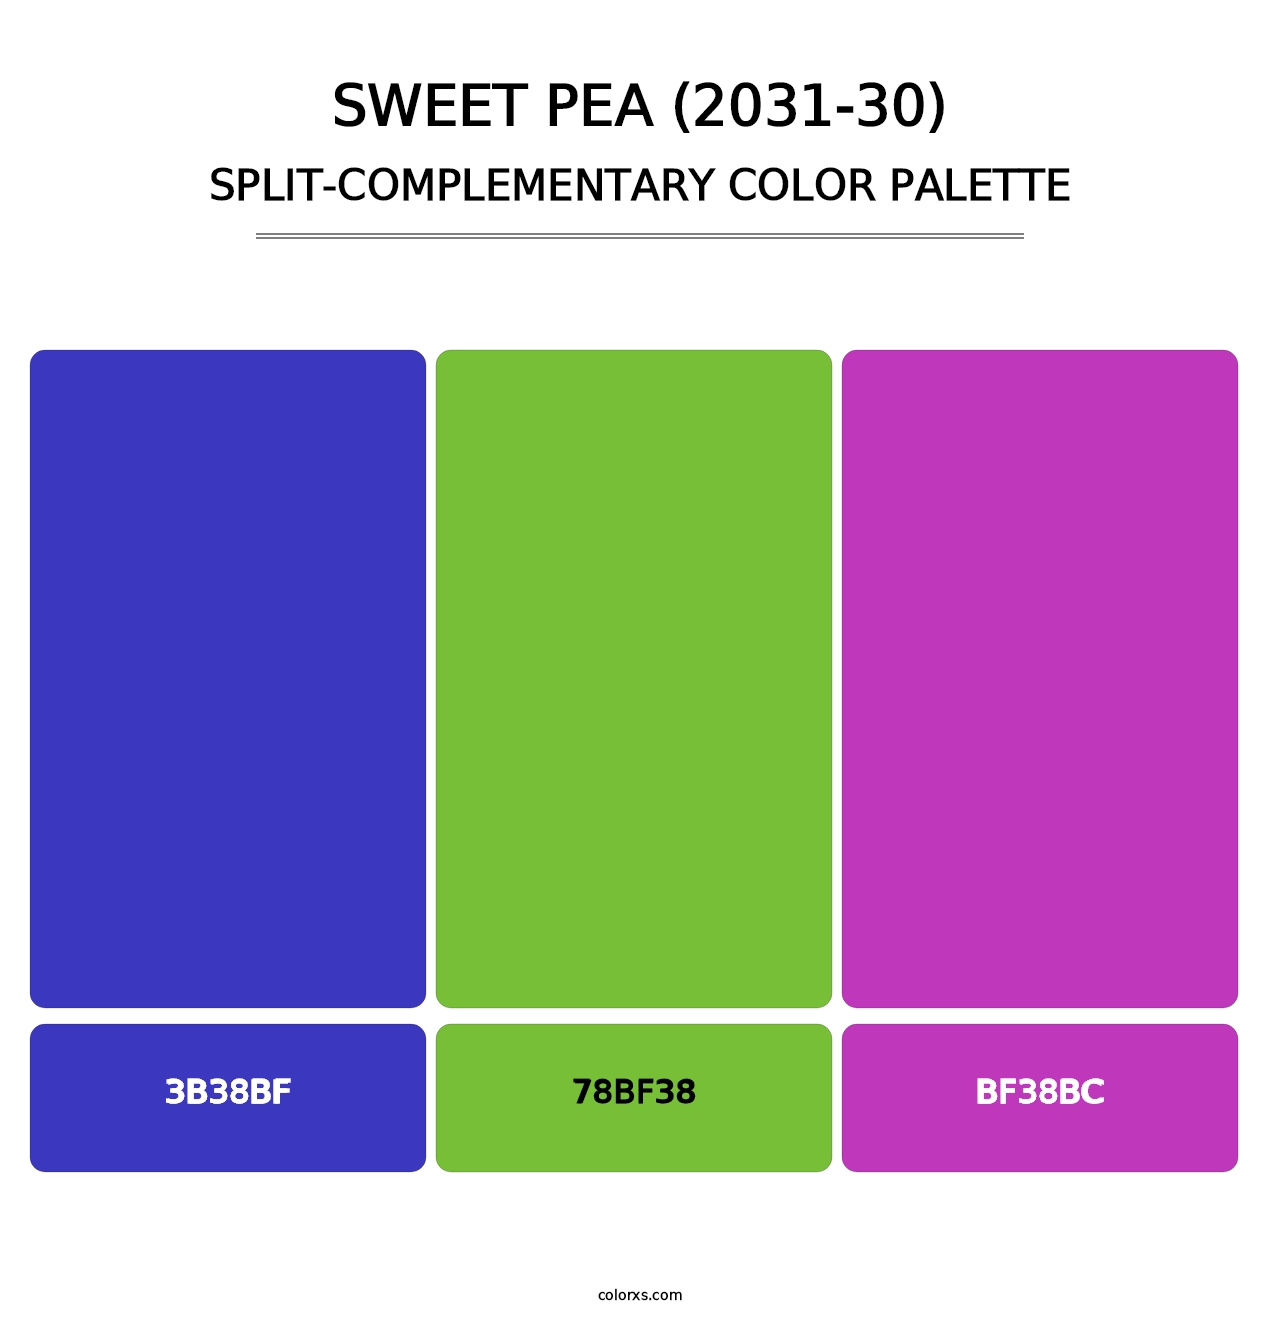 Sweet Pea (2031-30) - Split-Complementary Color Palette